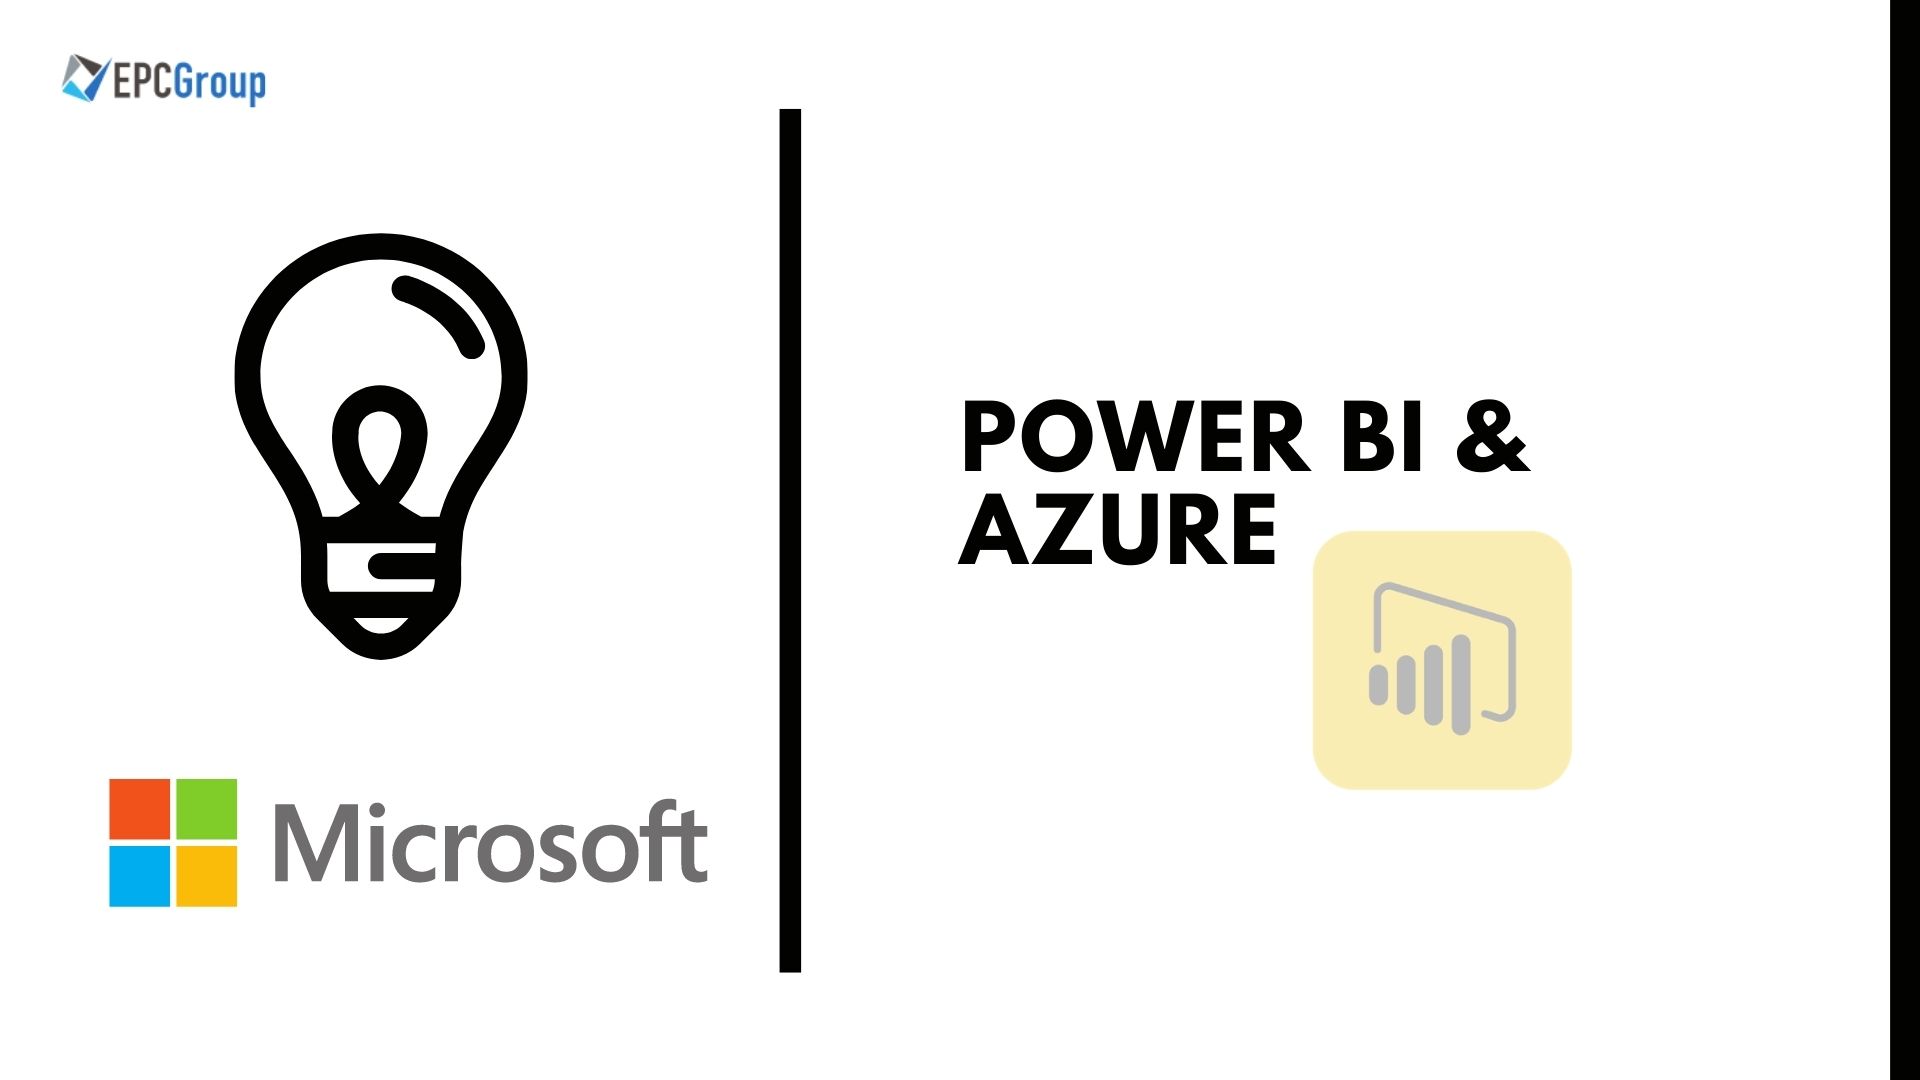 How To Publish Power BI To Azure?